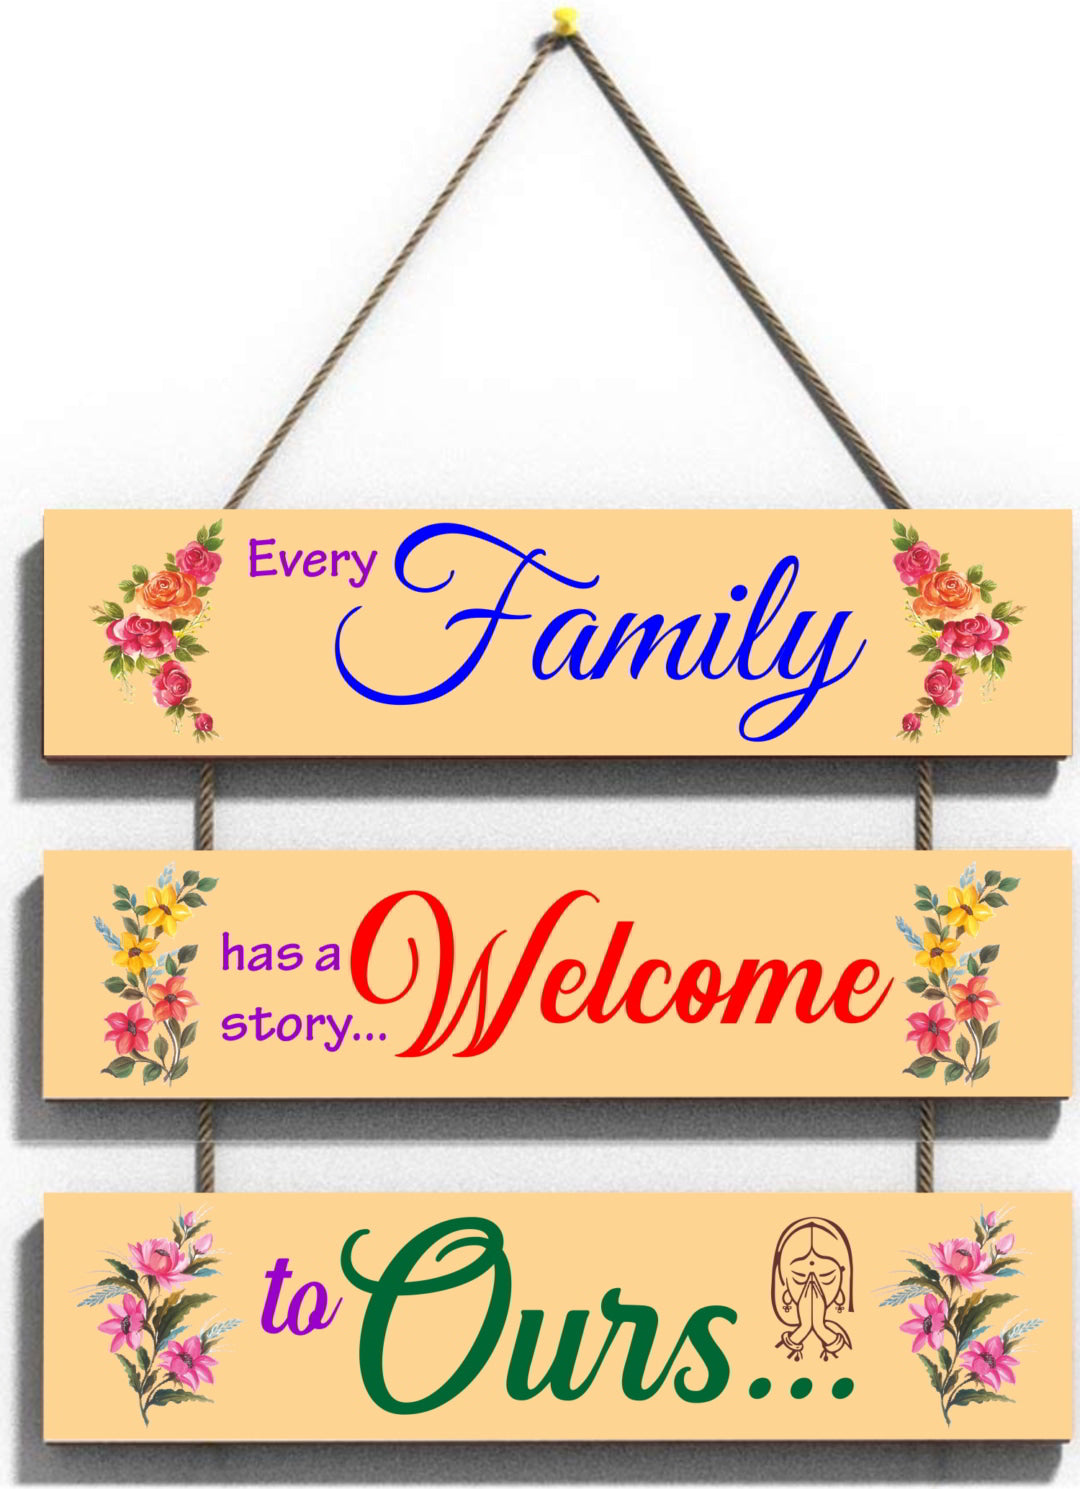 Family Welcome Ours Wall Hanging Board